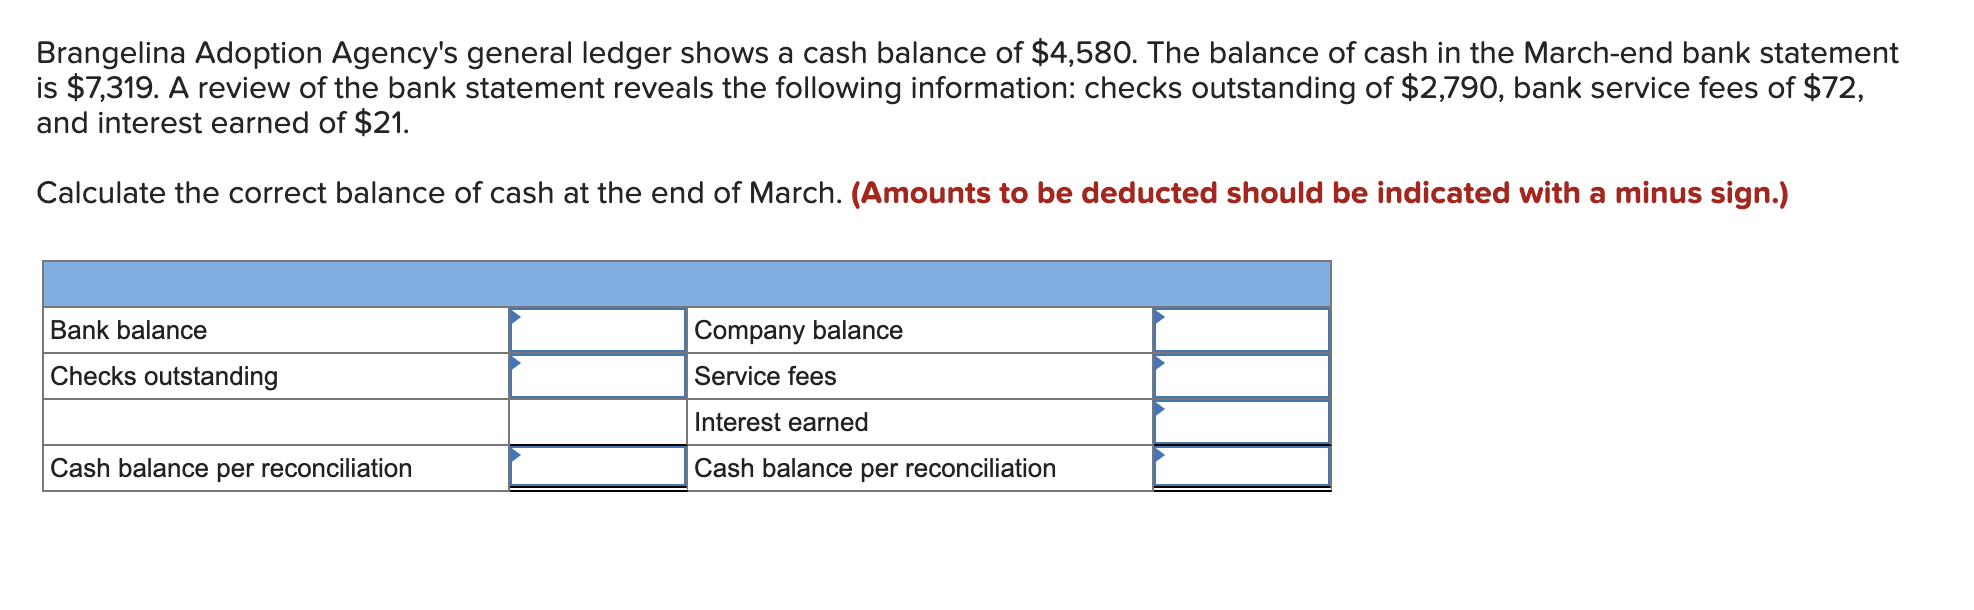 Brangelina Adoption Agencys general ledger shows a cash balance of $4,580. The balance of cash in the March-end bank stateme